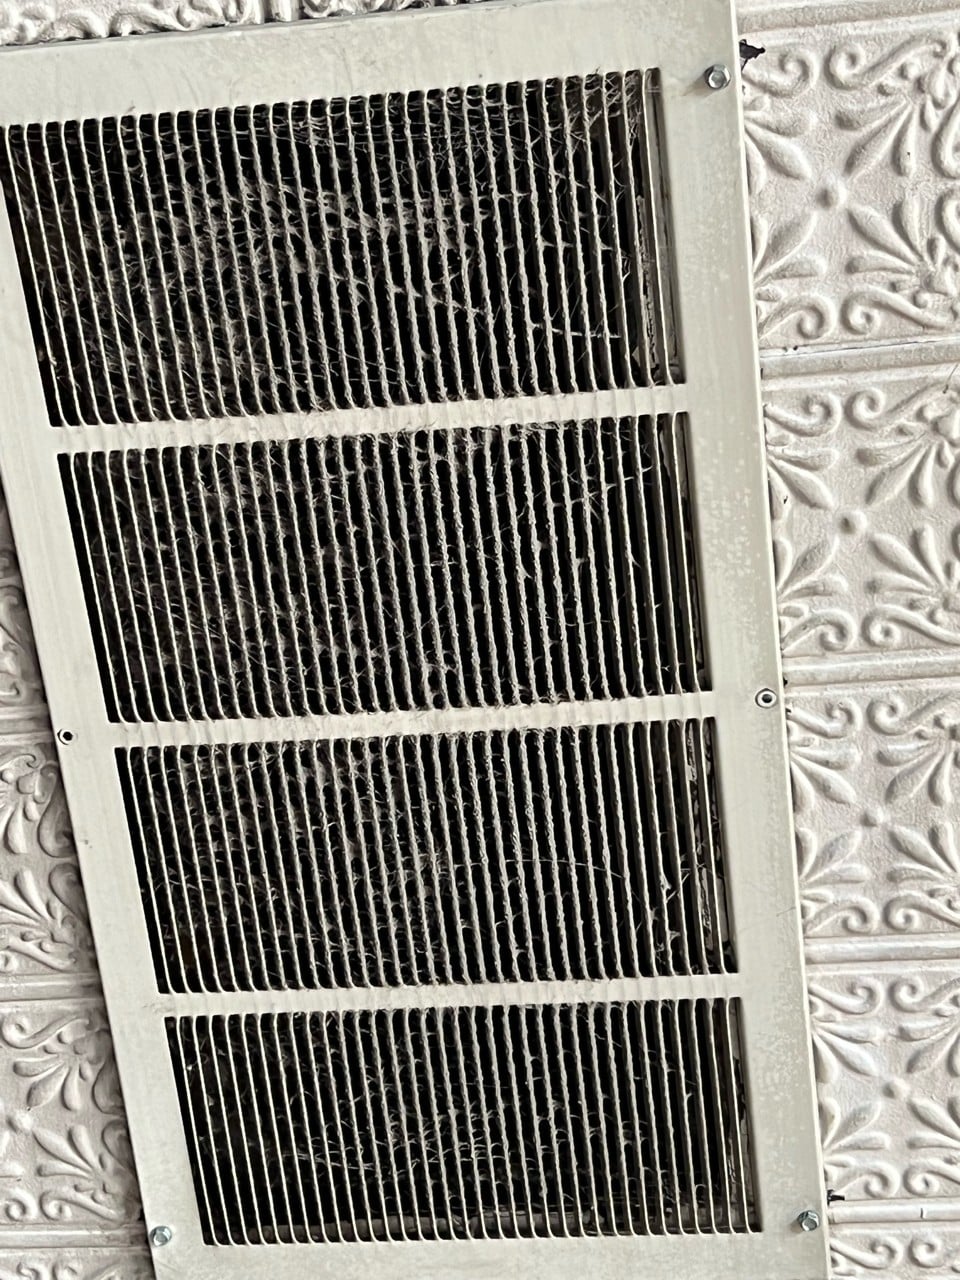 7 Signs Your Air Ducts Need Attention